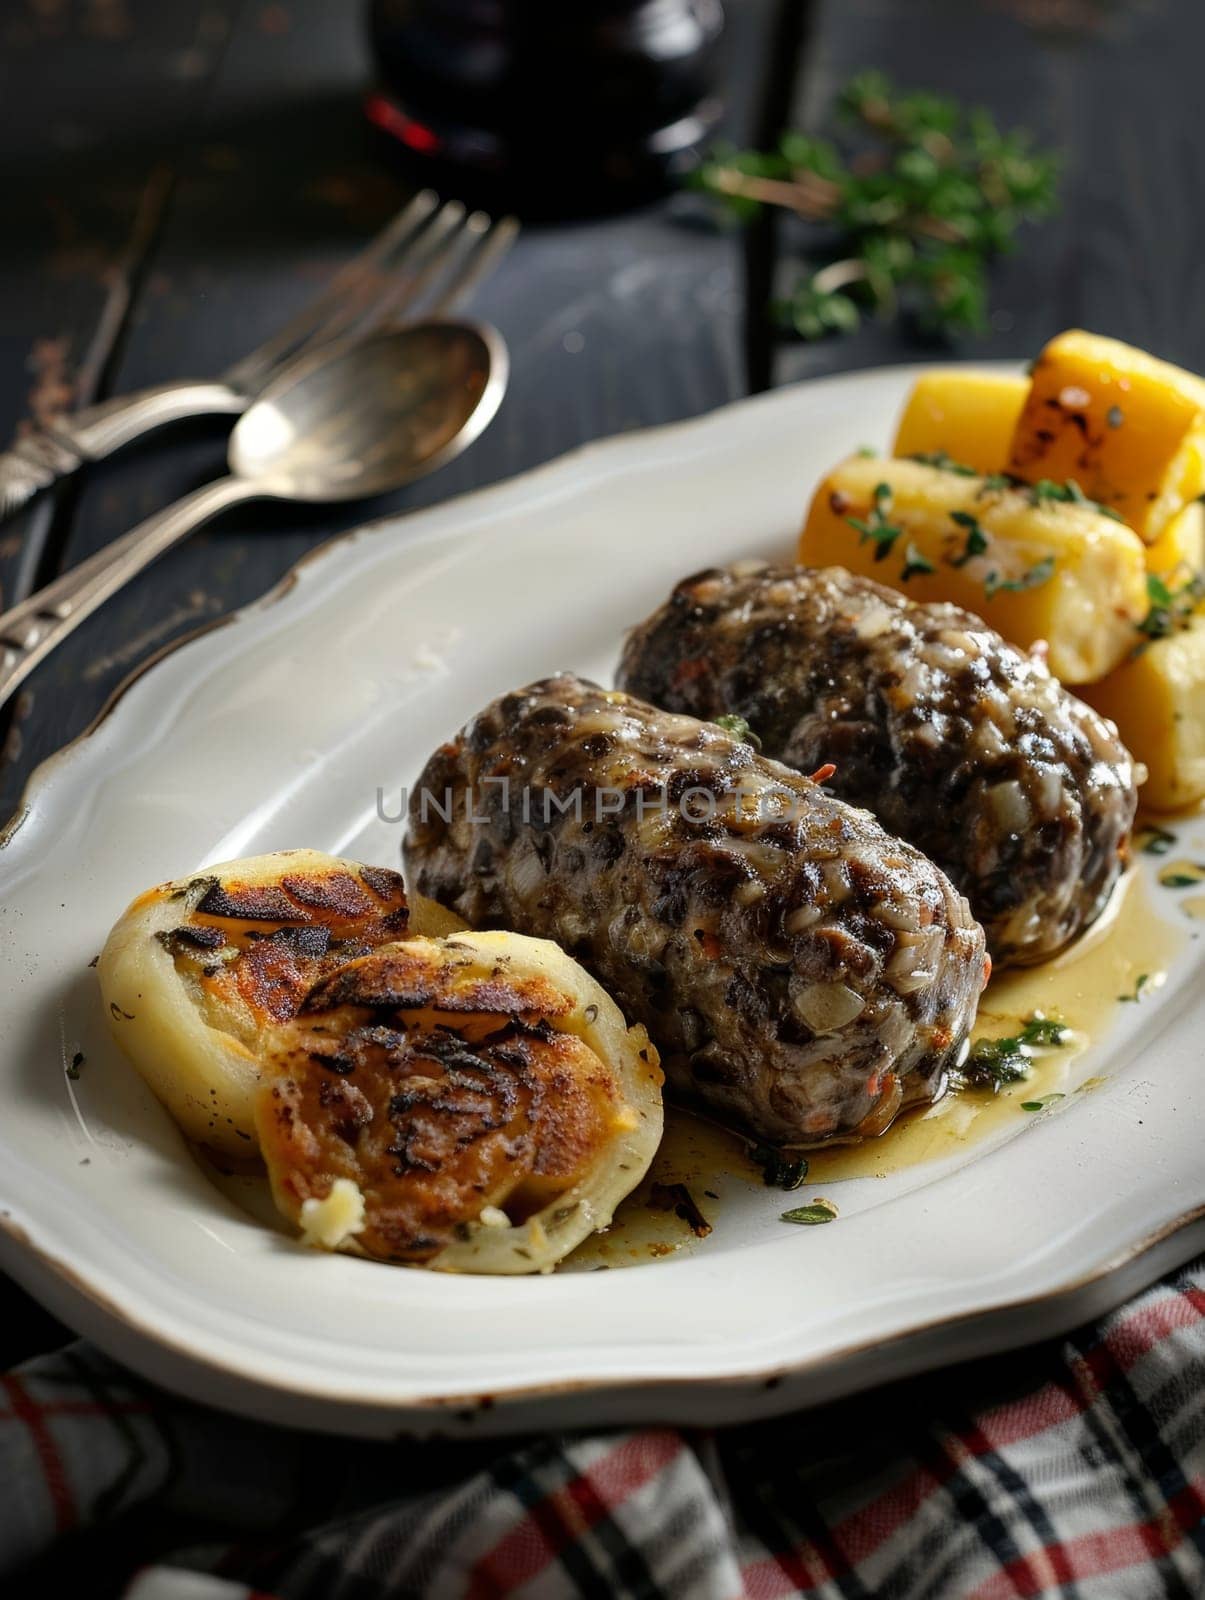 Authentic Scottish haggis dish with traditional accompaniments of mashed turnips neeps and potatoes tatties, served on a simple white platter. This classic, hearty meal represents cultural heritage. by sfinks